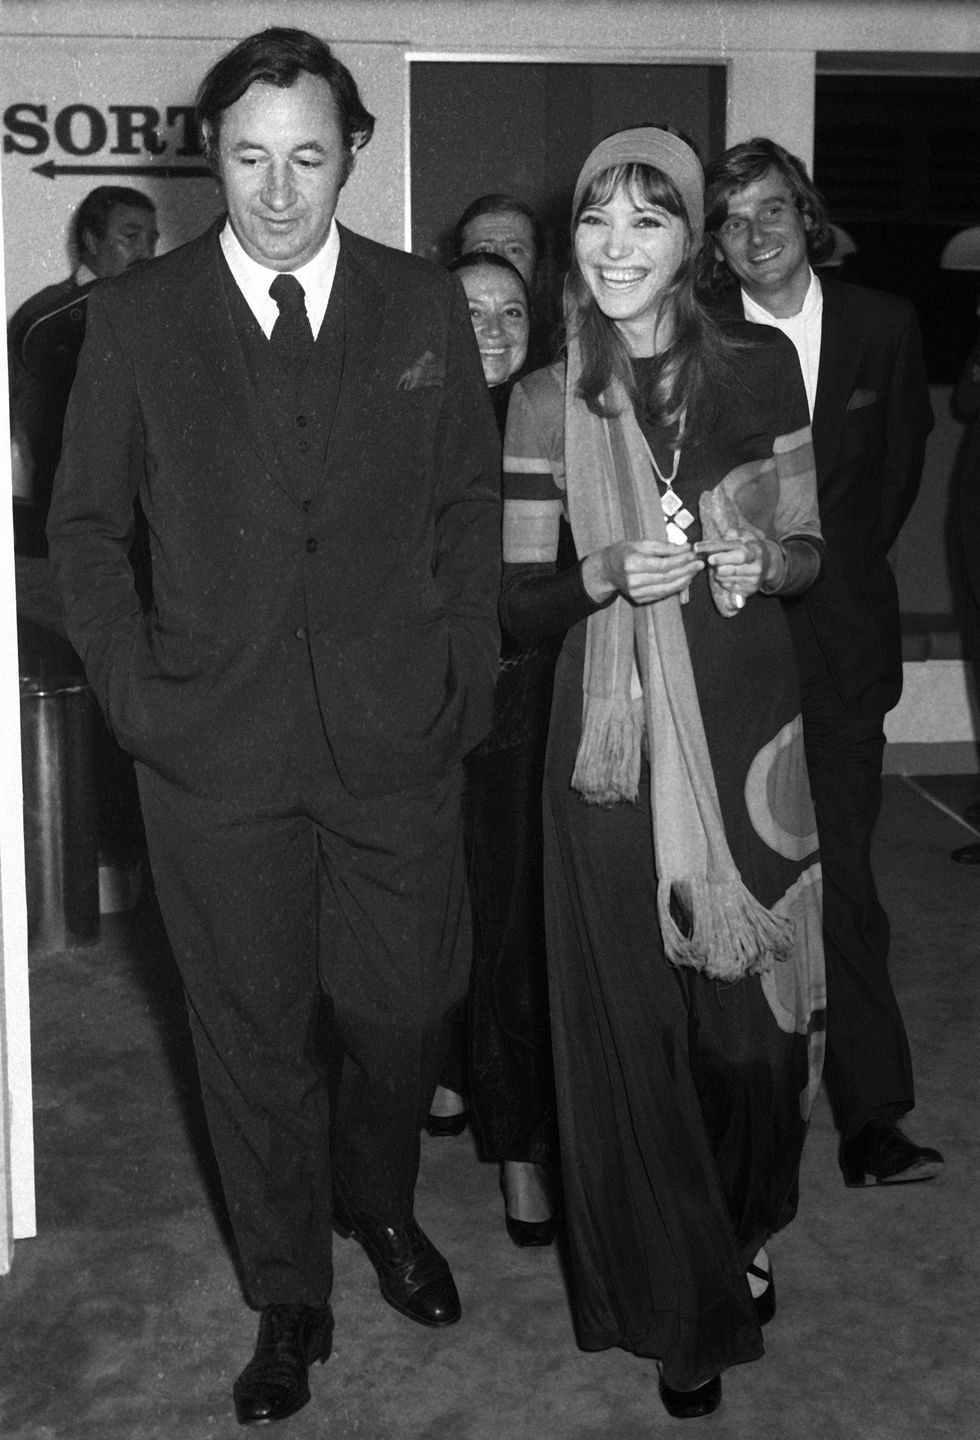 premiere of "justine" in france on september 29th, 1969